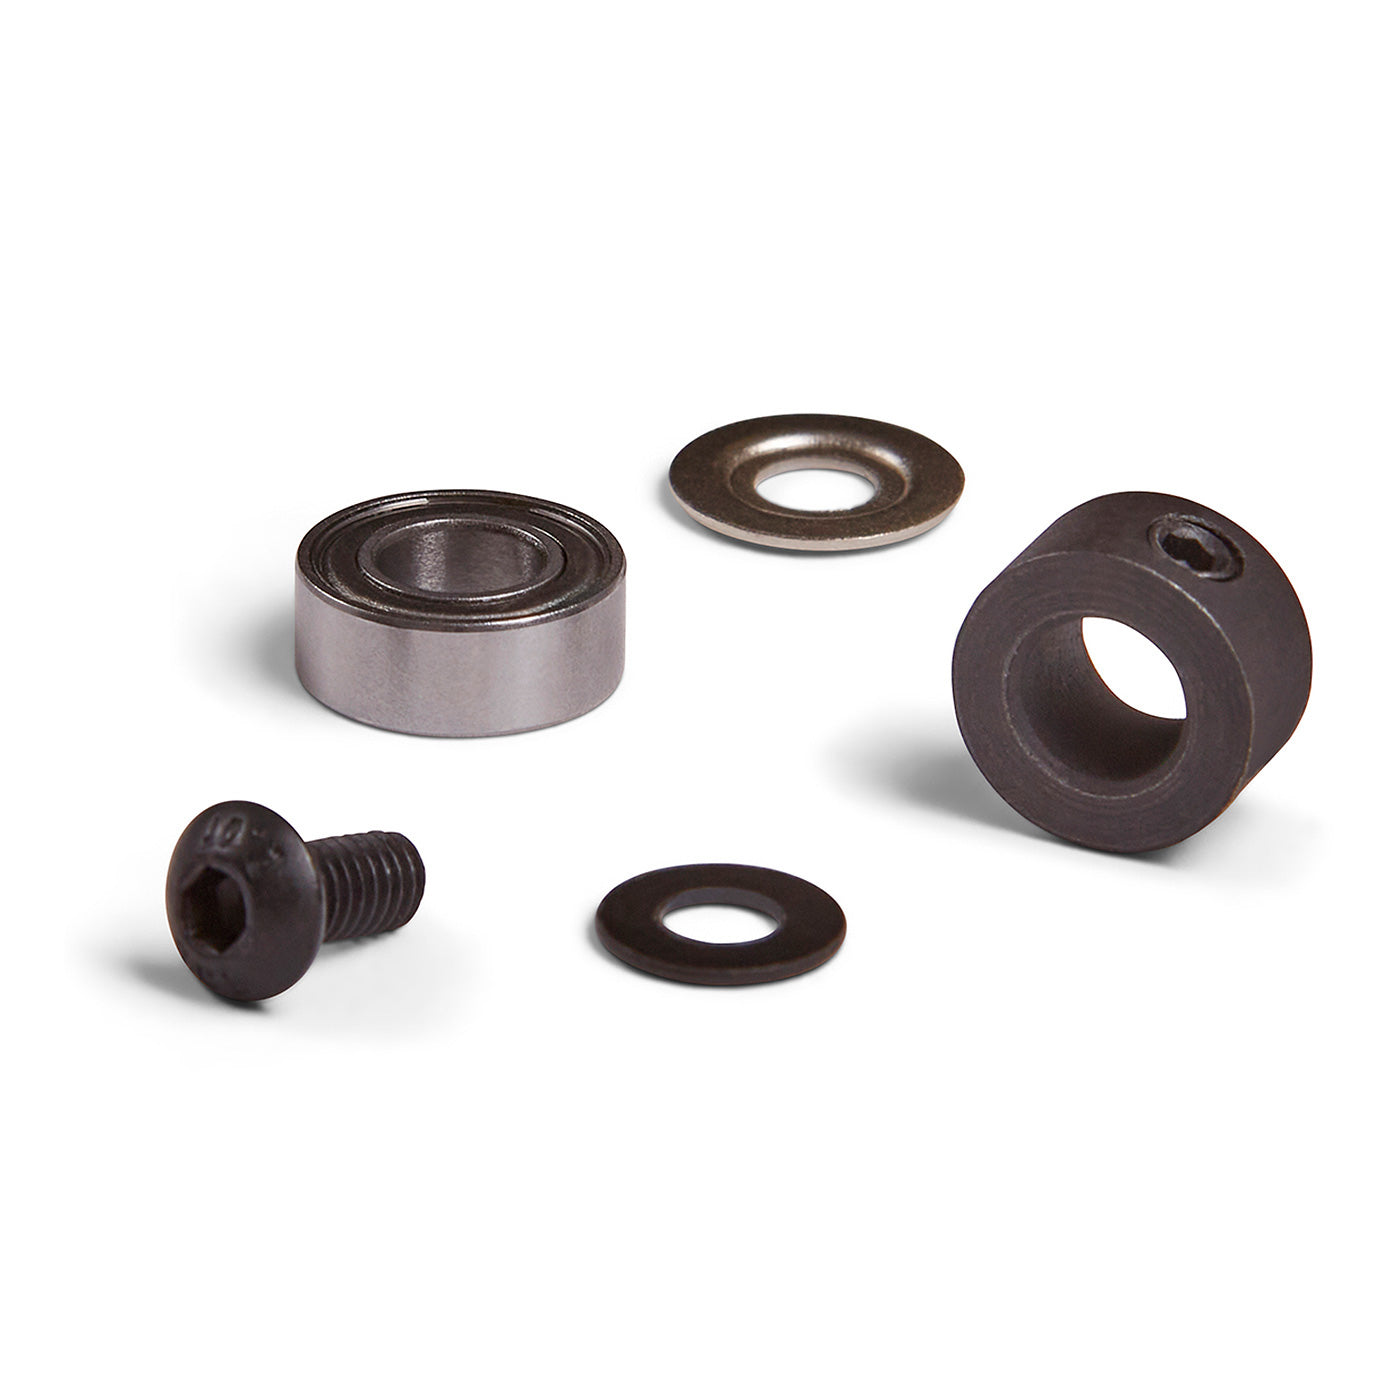 Bearing Kit for R5662, R5663, R5664, R5665, R5666, R5667, R5668, R5669 and R5670  